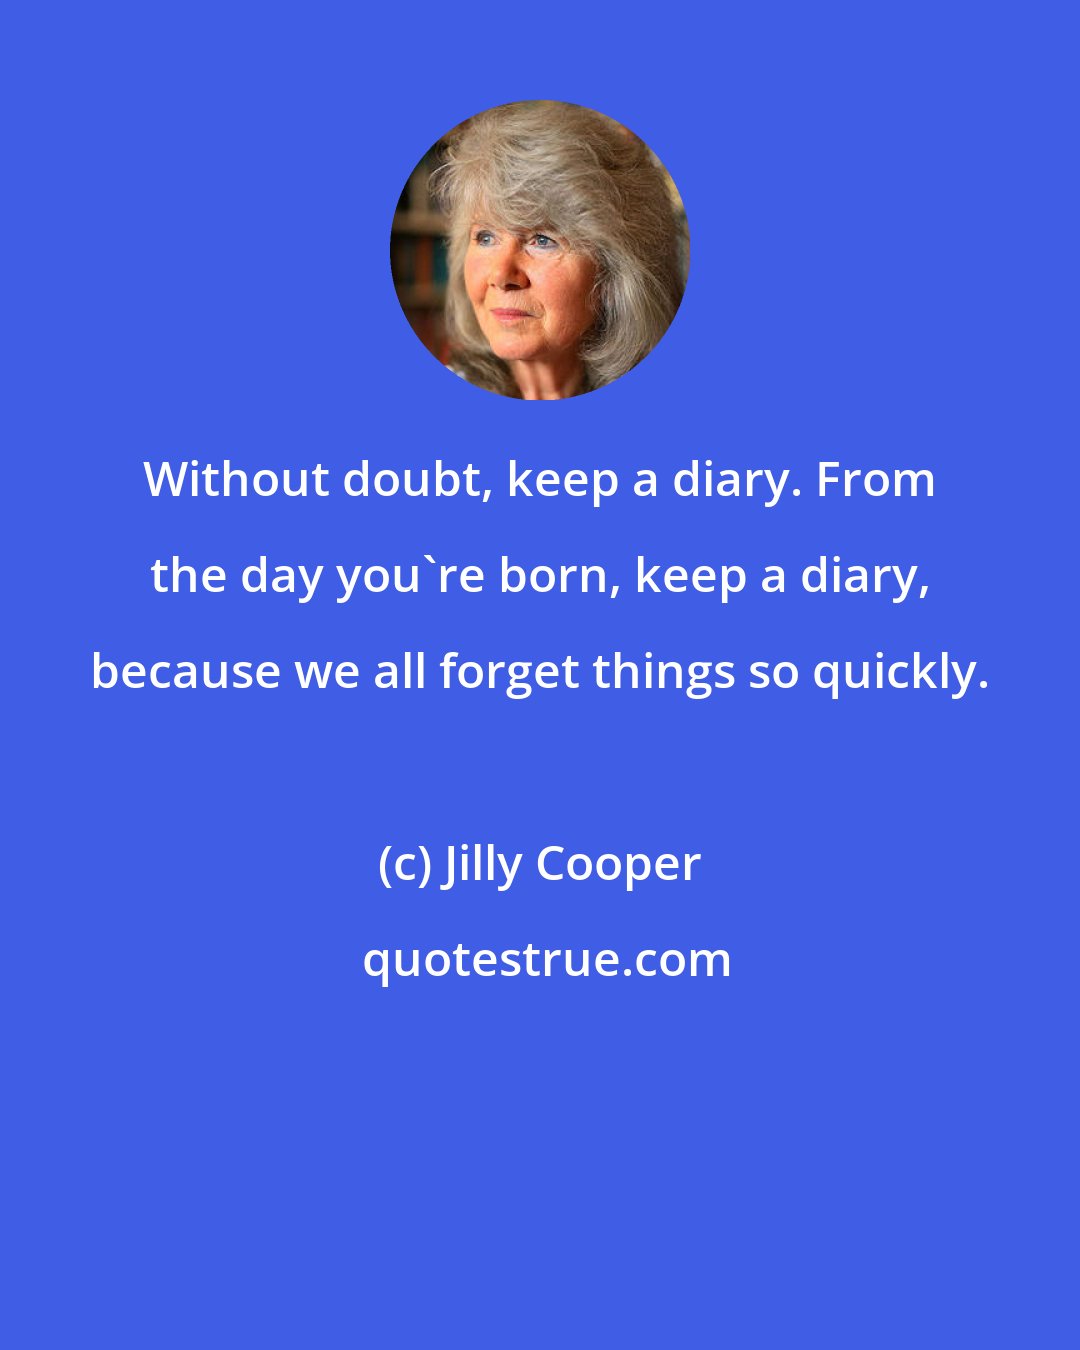 Jilly Cooper: Without doubt, keep a diary. From the day you're born, keep a diary, because we all forget things so quickly.